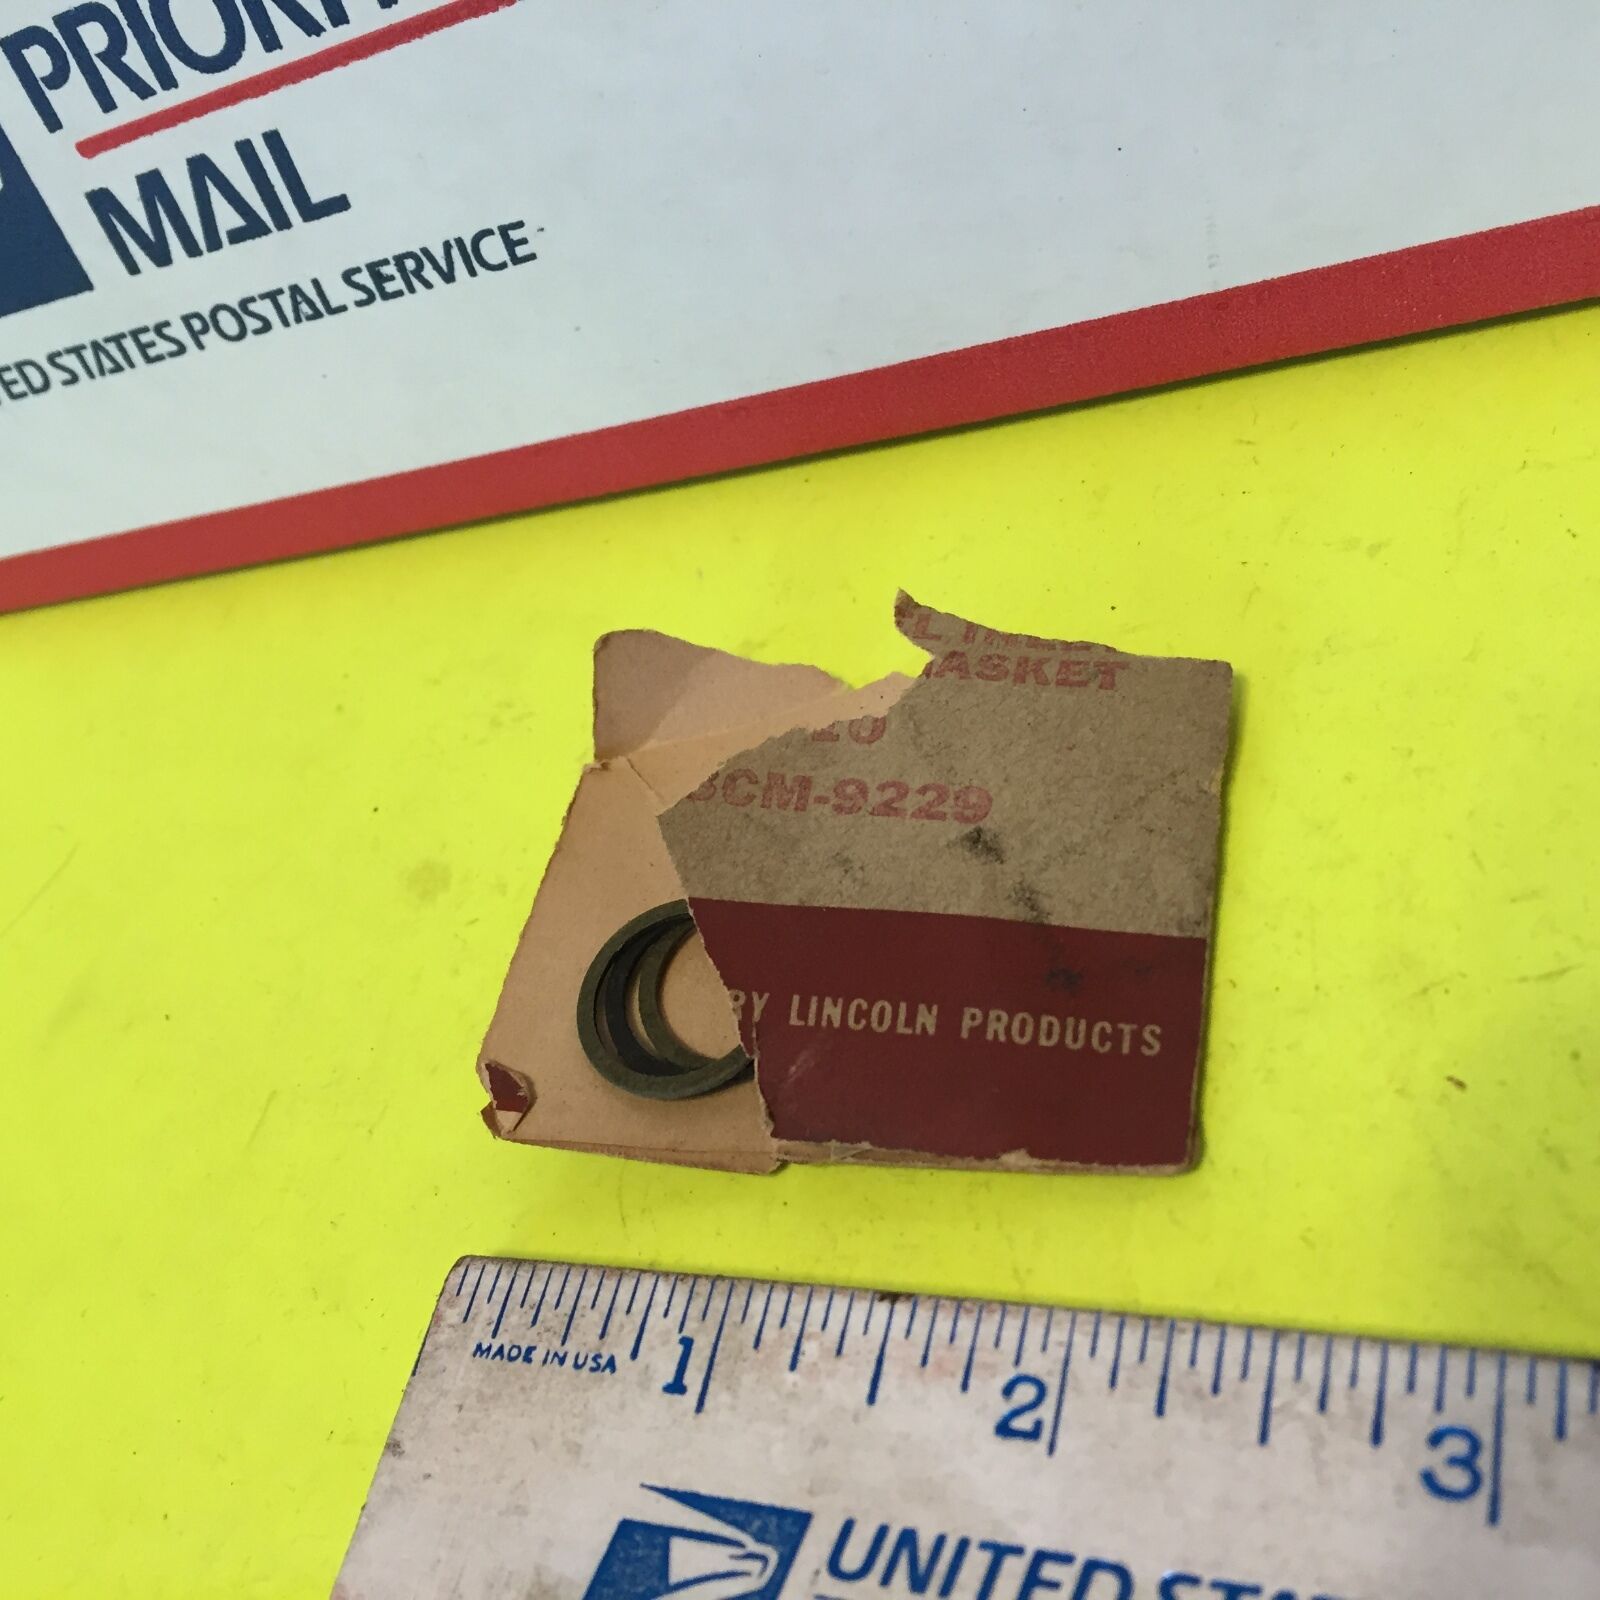 Lincoln   gasket,  BCM-9229, lot in photo.   Item:  4403